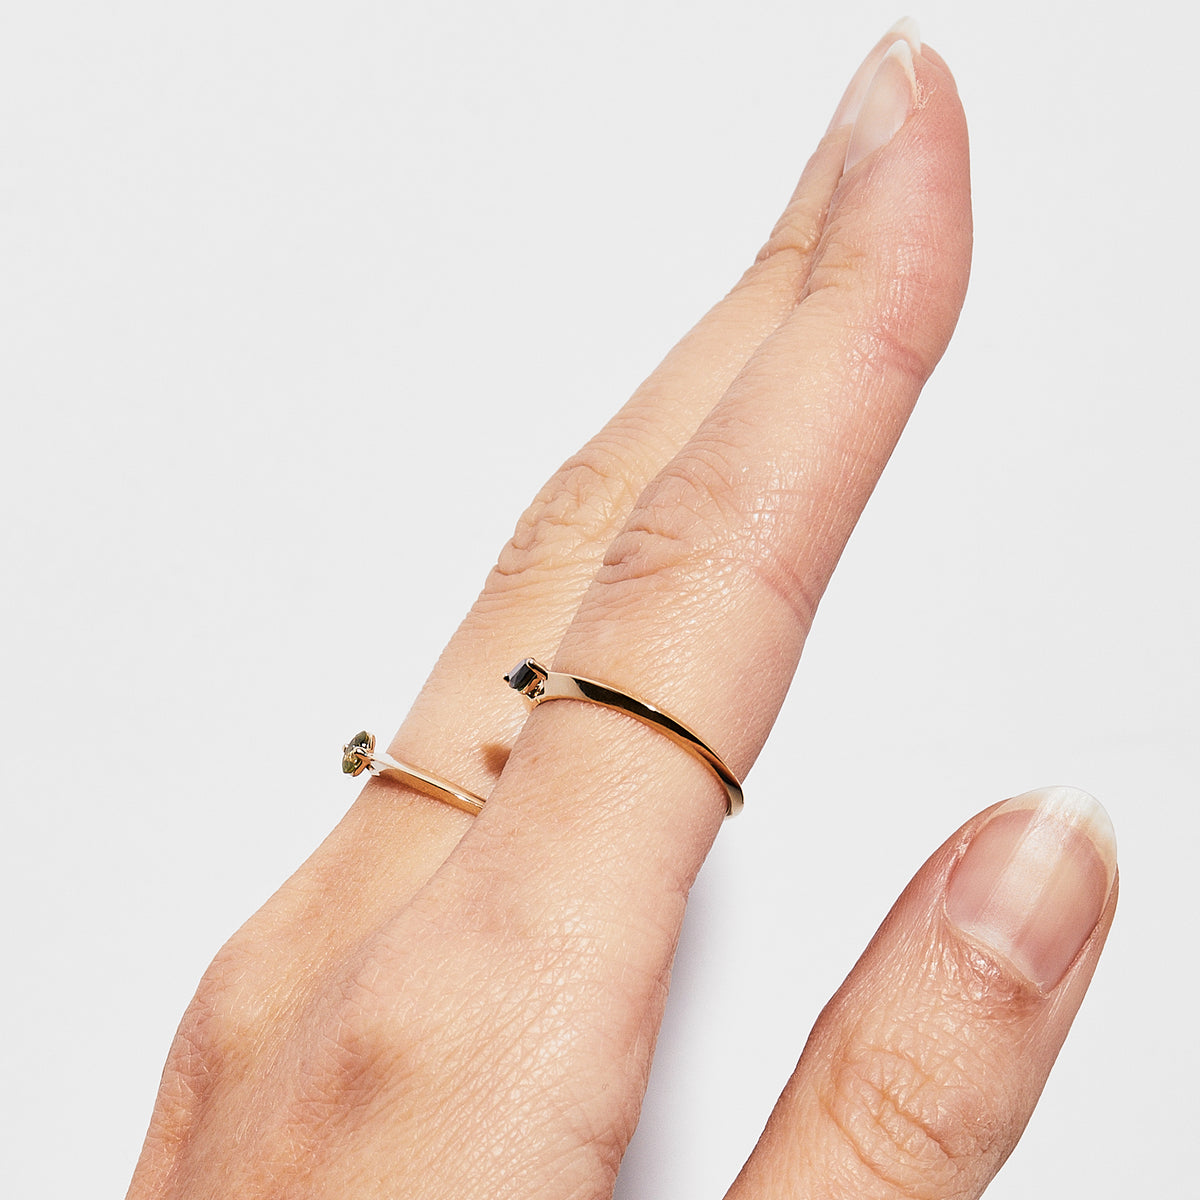 A person's hand showing a dainty 14K yellow gold ring worn on the ring finger. The ring features a small, green Australian Sapphire set at the center.